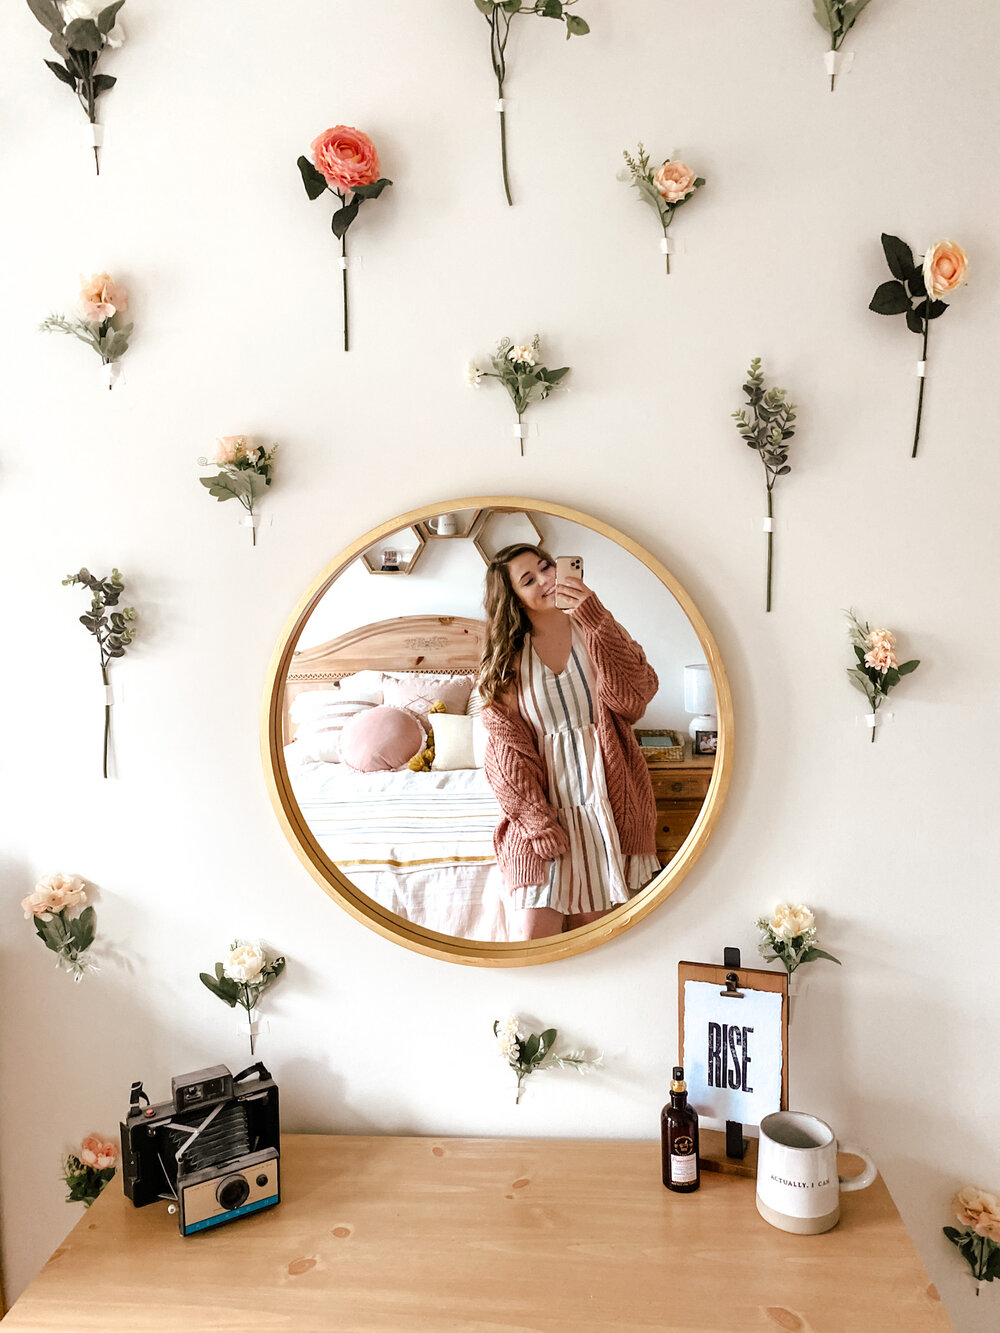 How To Make Flower Wall DIY: Flower Wall — Kelsey Haver Designs